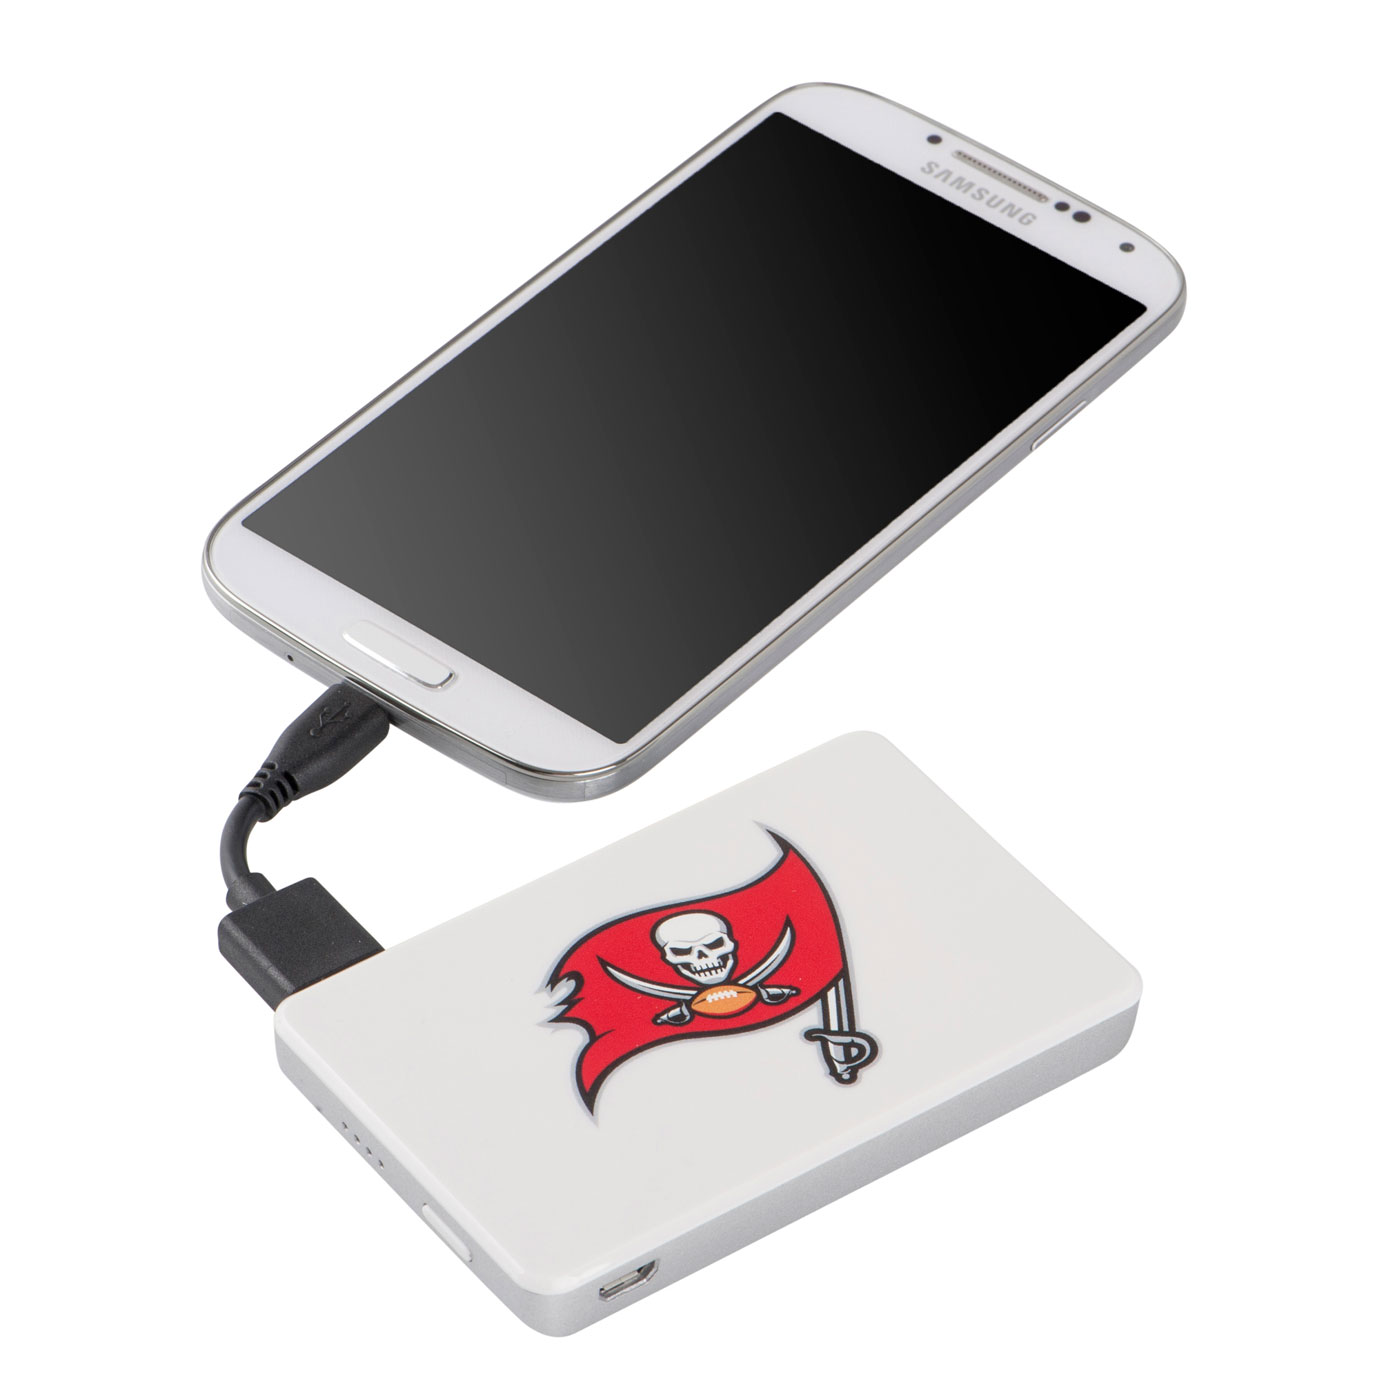 Mobile Power Bank with Storage